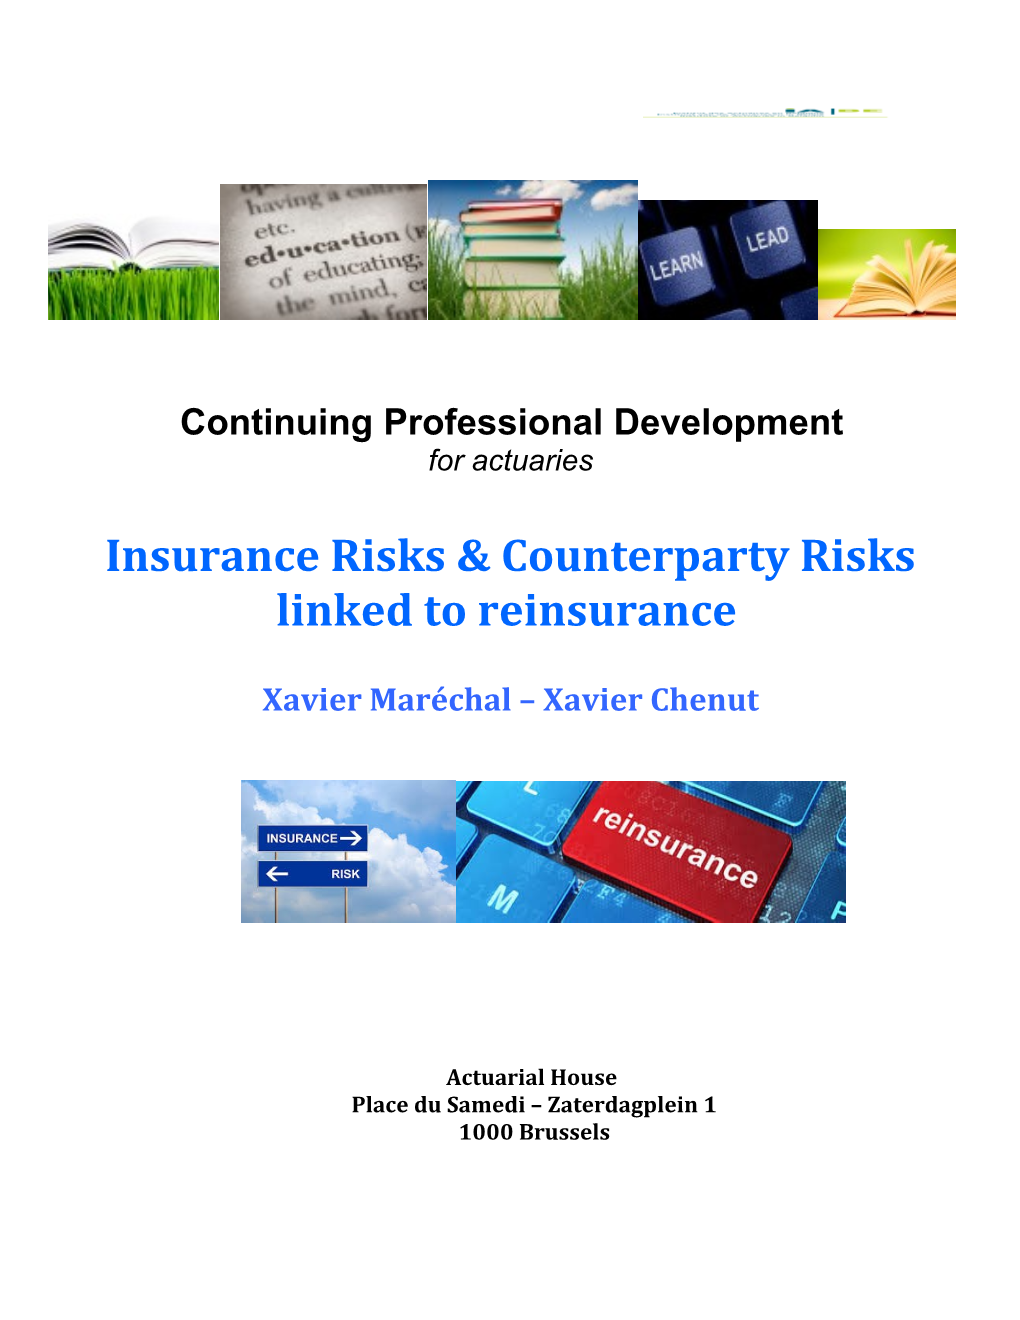 Insurance Risks & Counterparty Risks Linked to Reinsurance